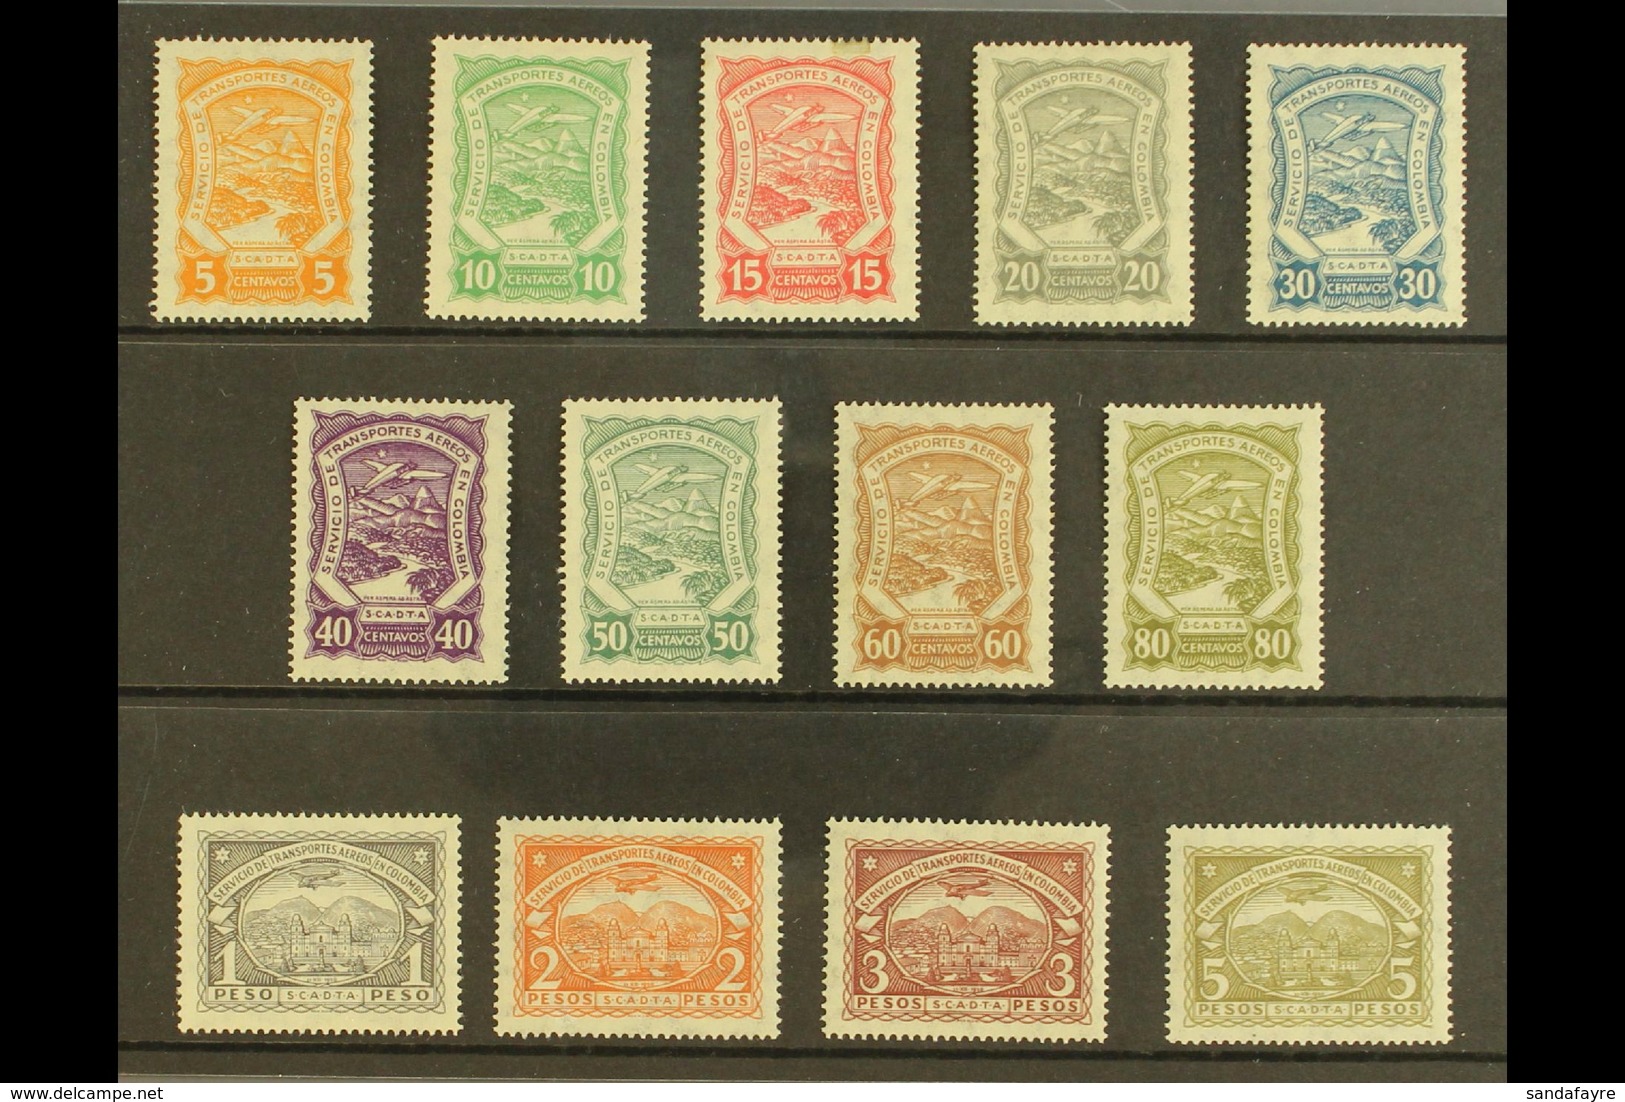 PRIVATE AIRS - SCADTA  1923-28 Complete Set, Scott C38/50 (SG 37/49, Michel 29/39 & 43/44), Never Hinged Mint, The 15c W - Colombia